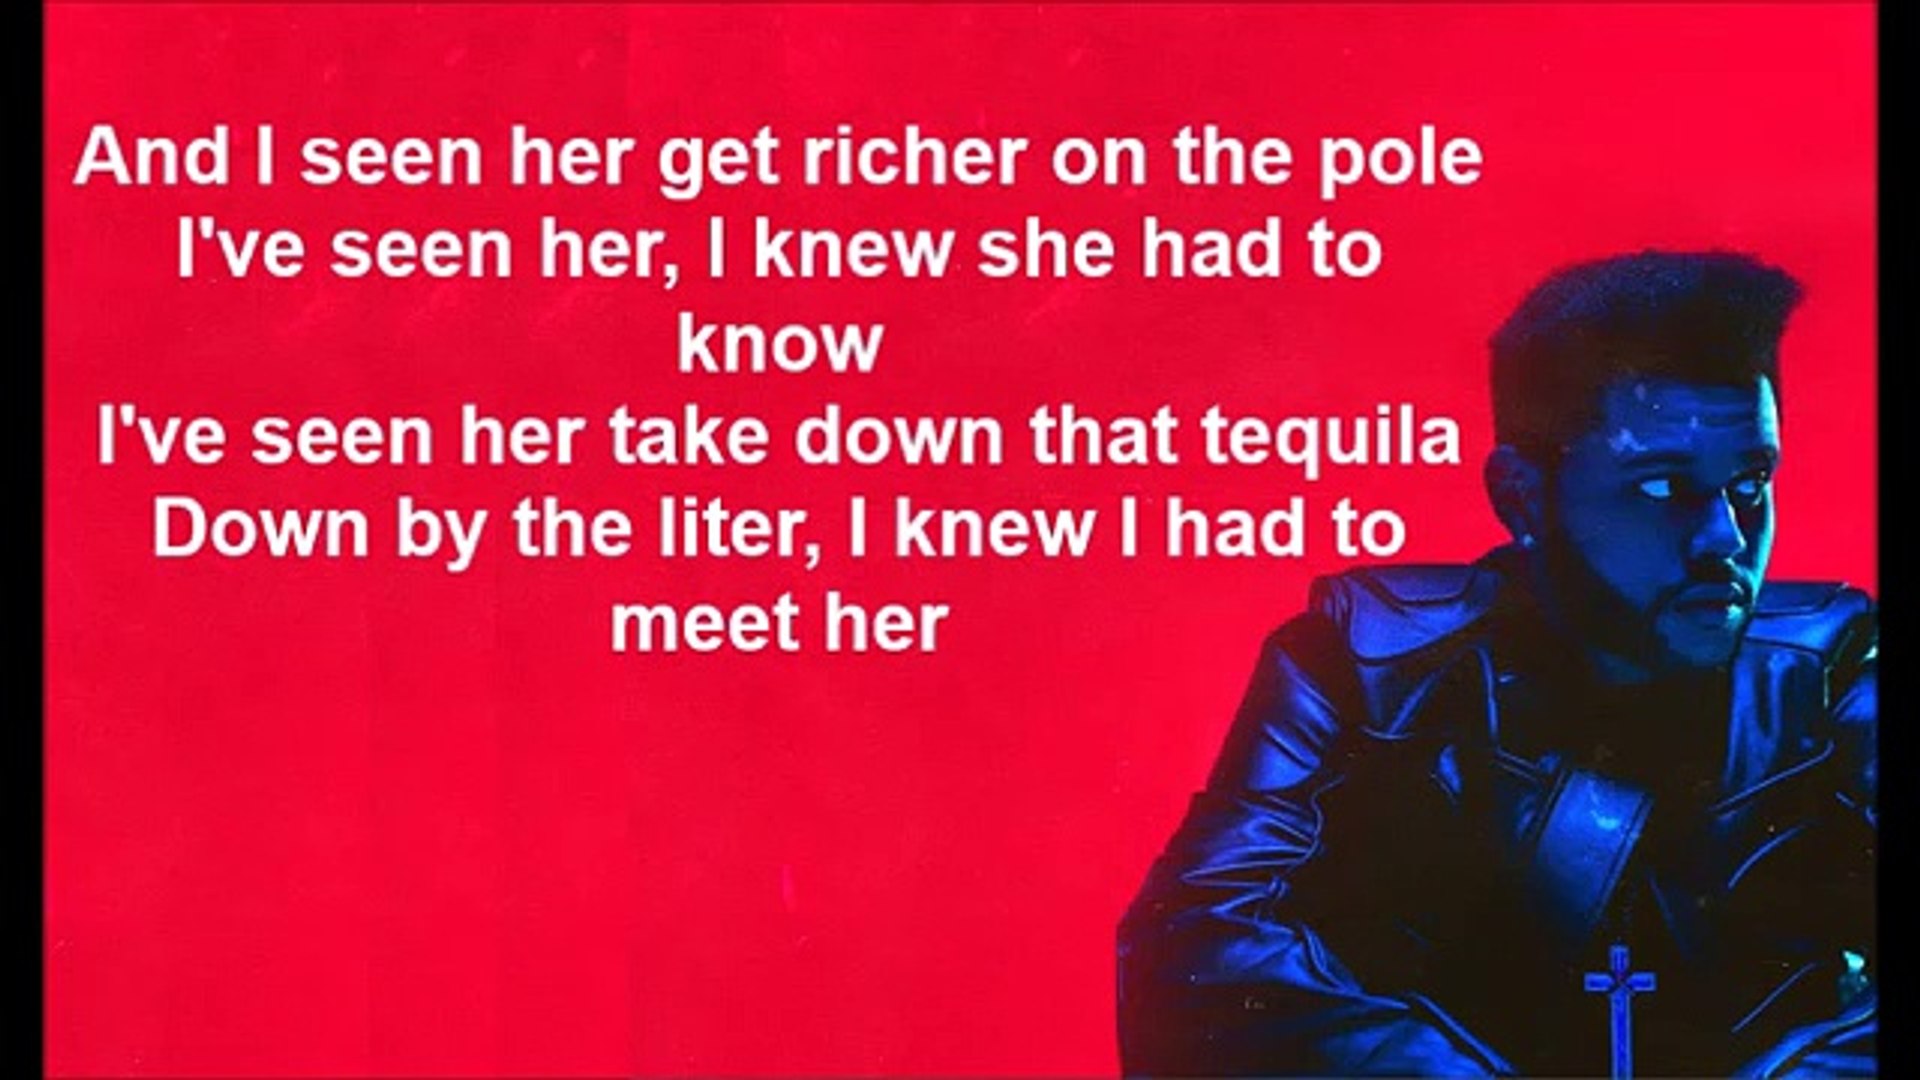 The Weeknd - Party Monster Lyrics